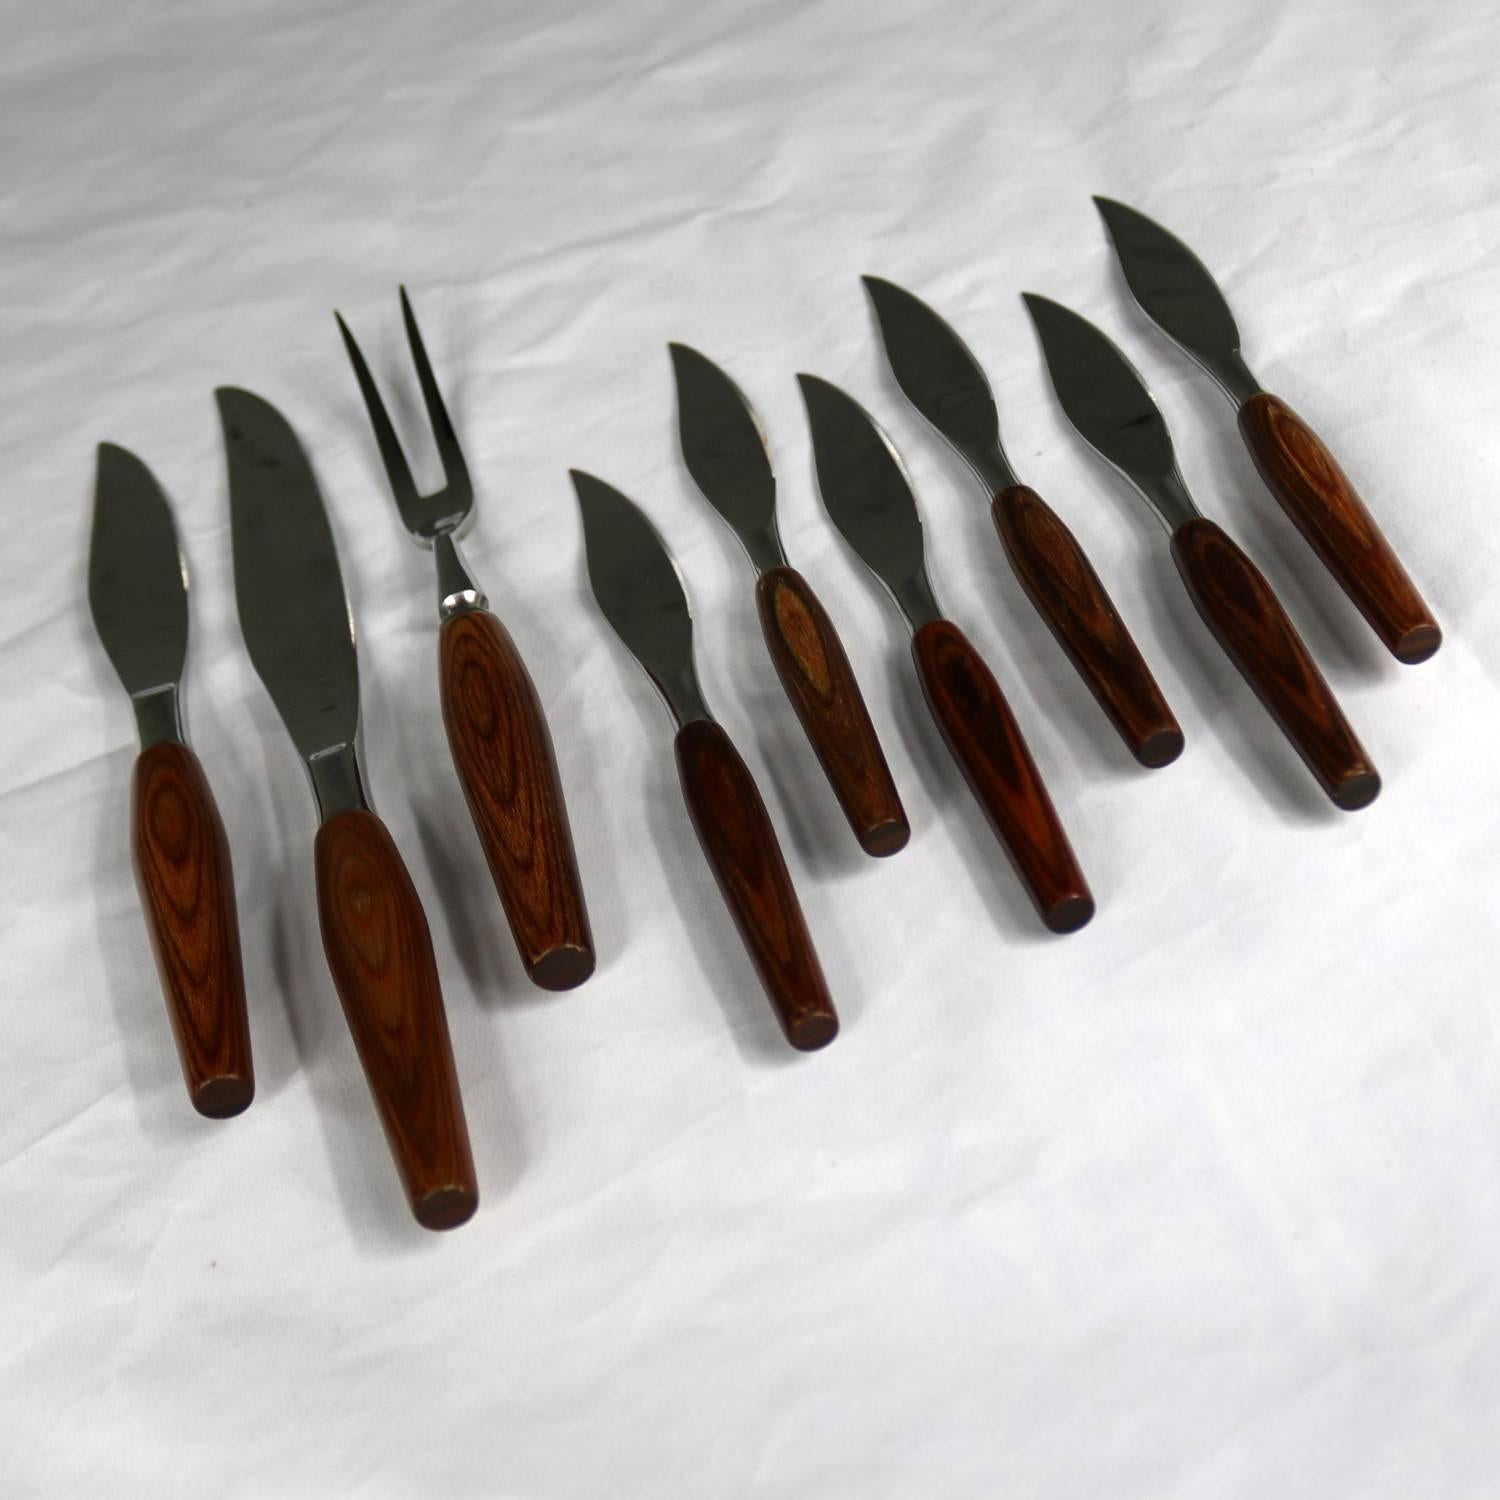 Mid-Century Modern Regent Sheffield Cutlery Teak and Stainless Mode Danish Steak Knives and Serving